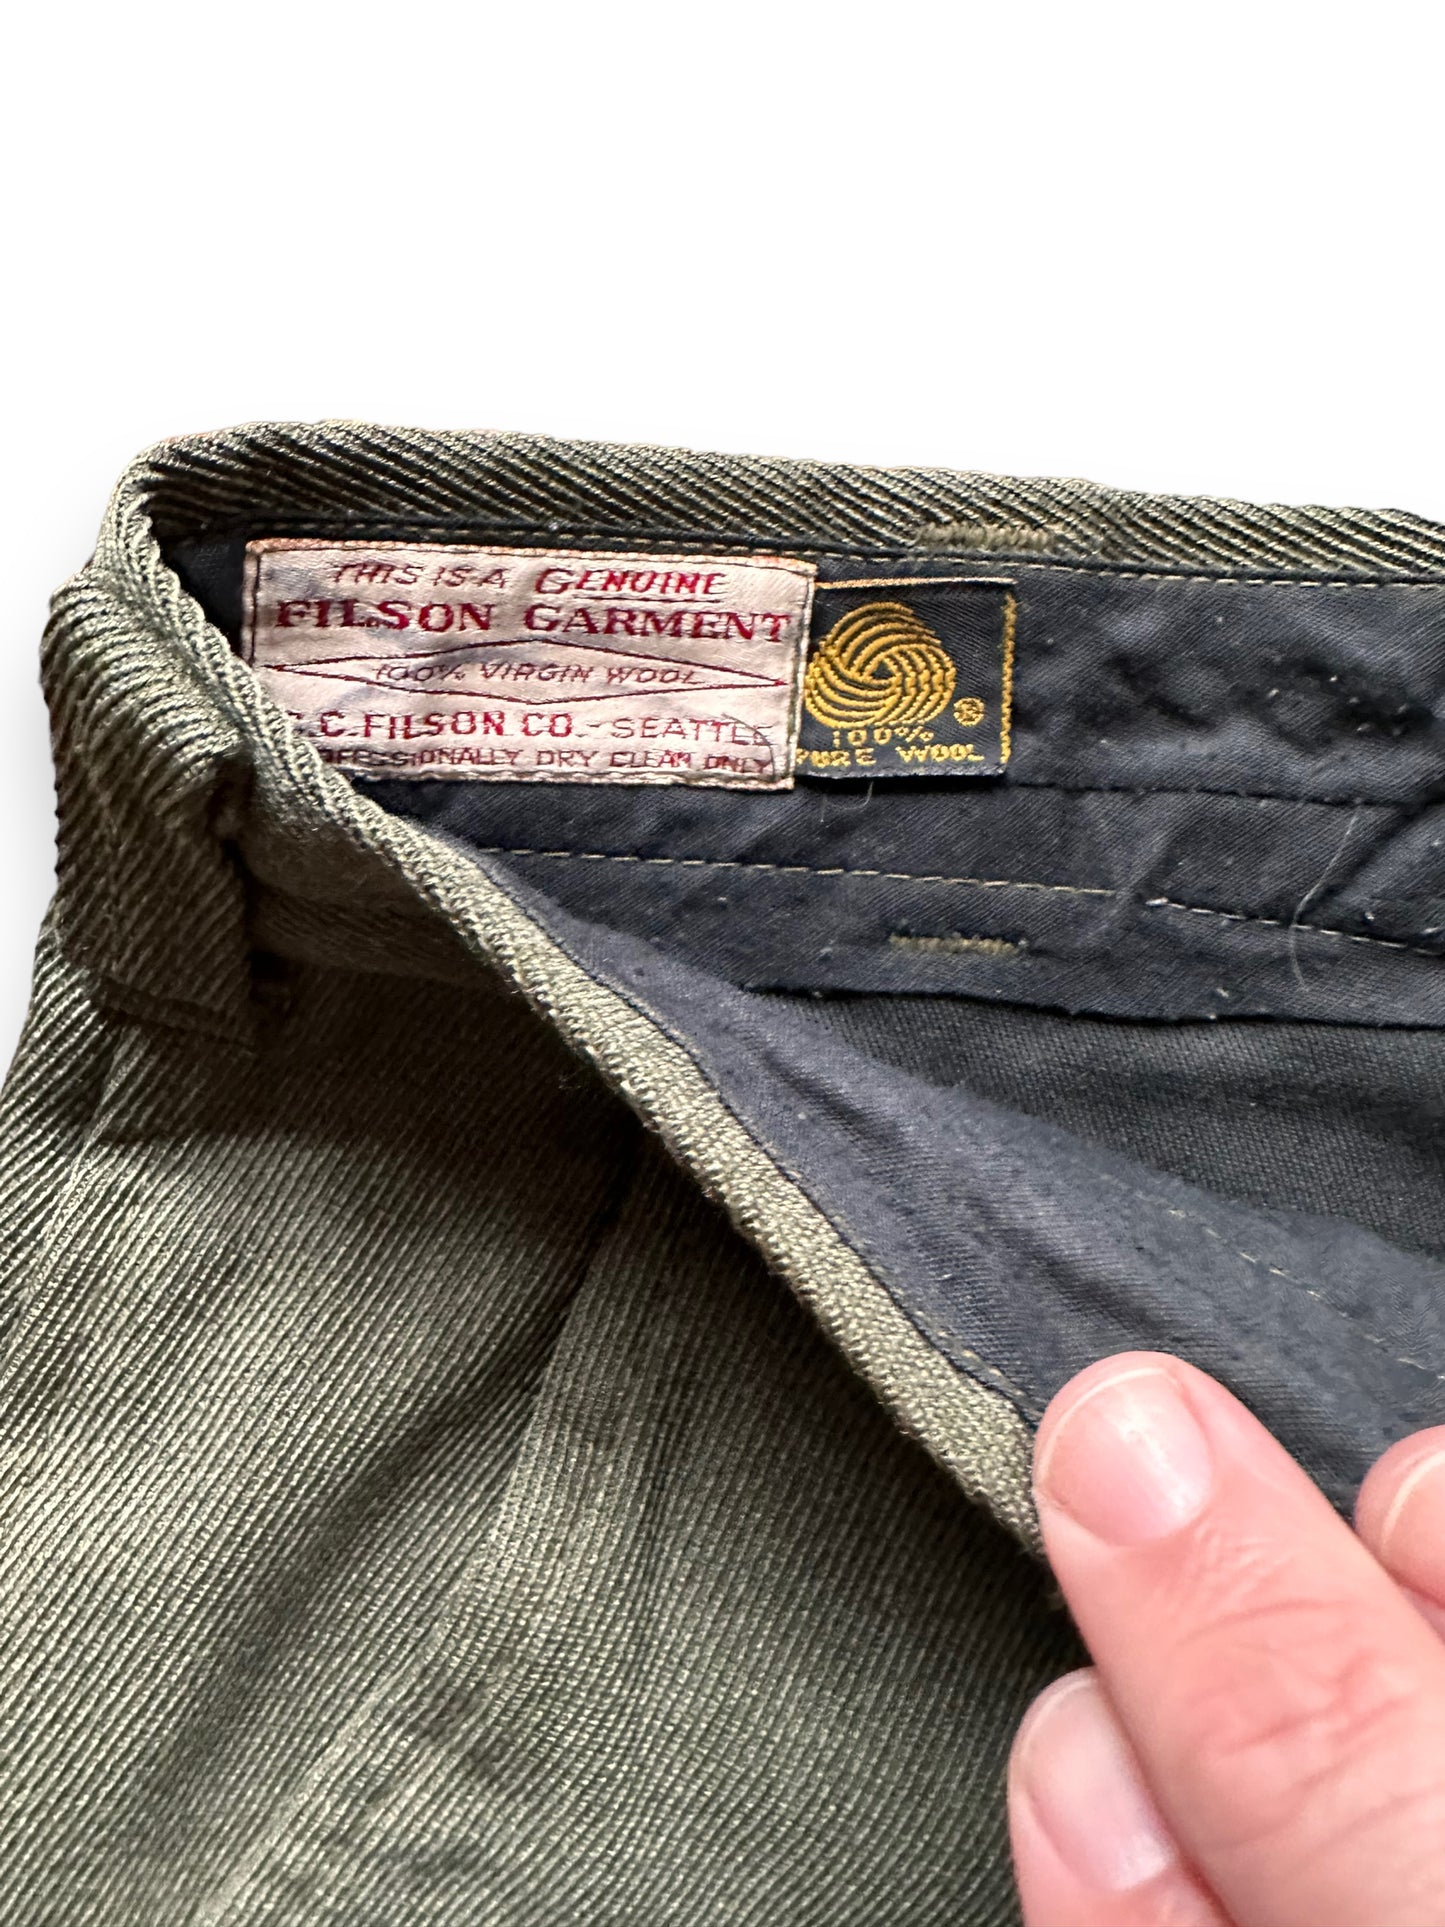 Tag View of Vintage Filson Whipcord Shorts W30 |  Barn Owl Vintage Goods | Vintage Filson Workwear Seattle